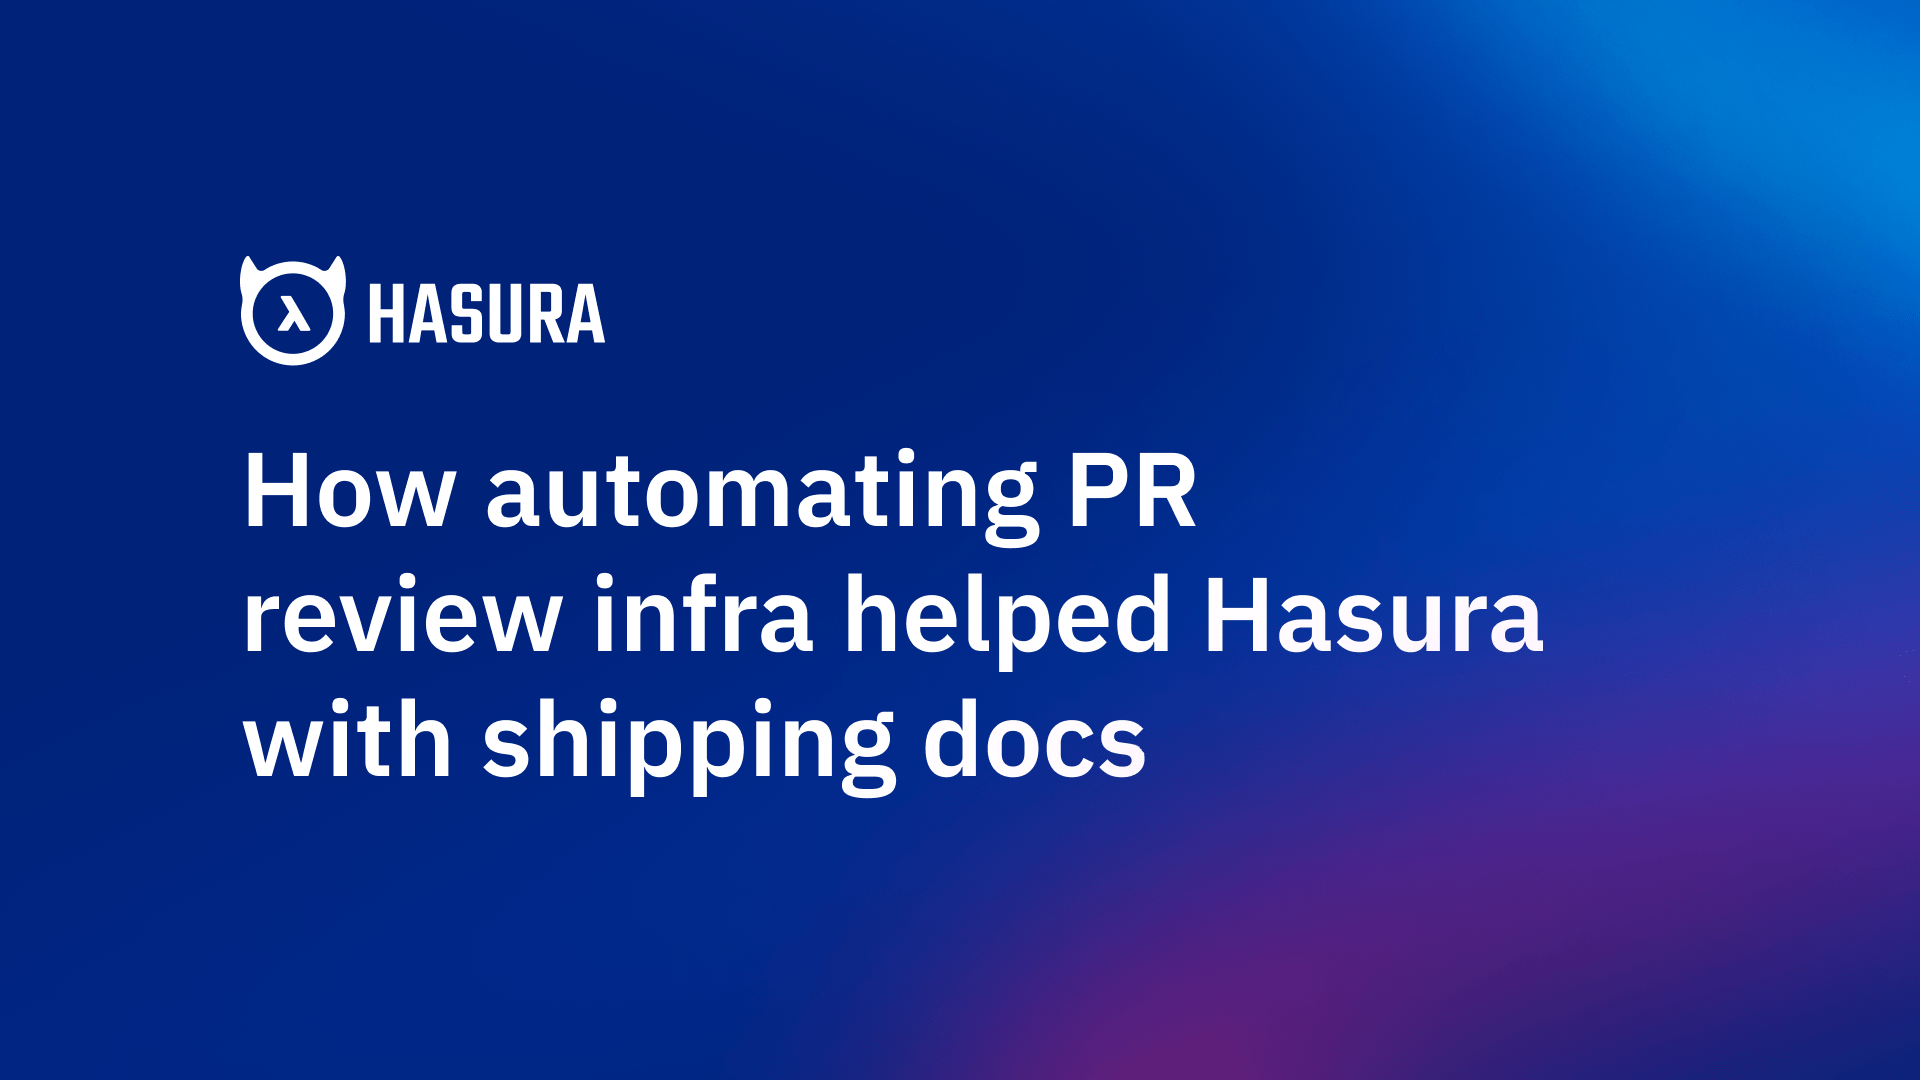 How automating PR review infra helped Hasura with shipping docs